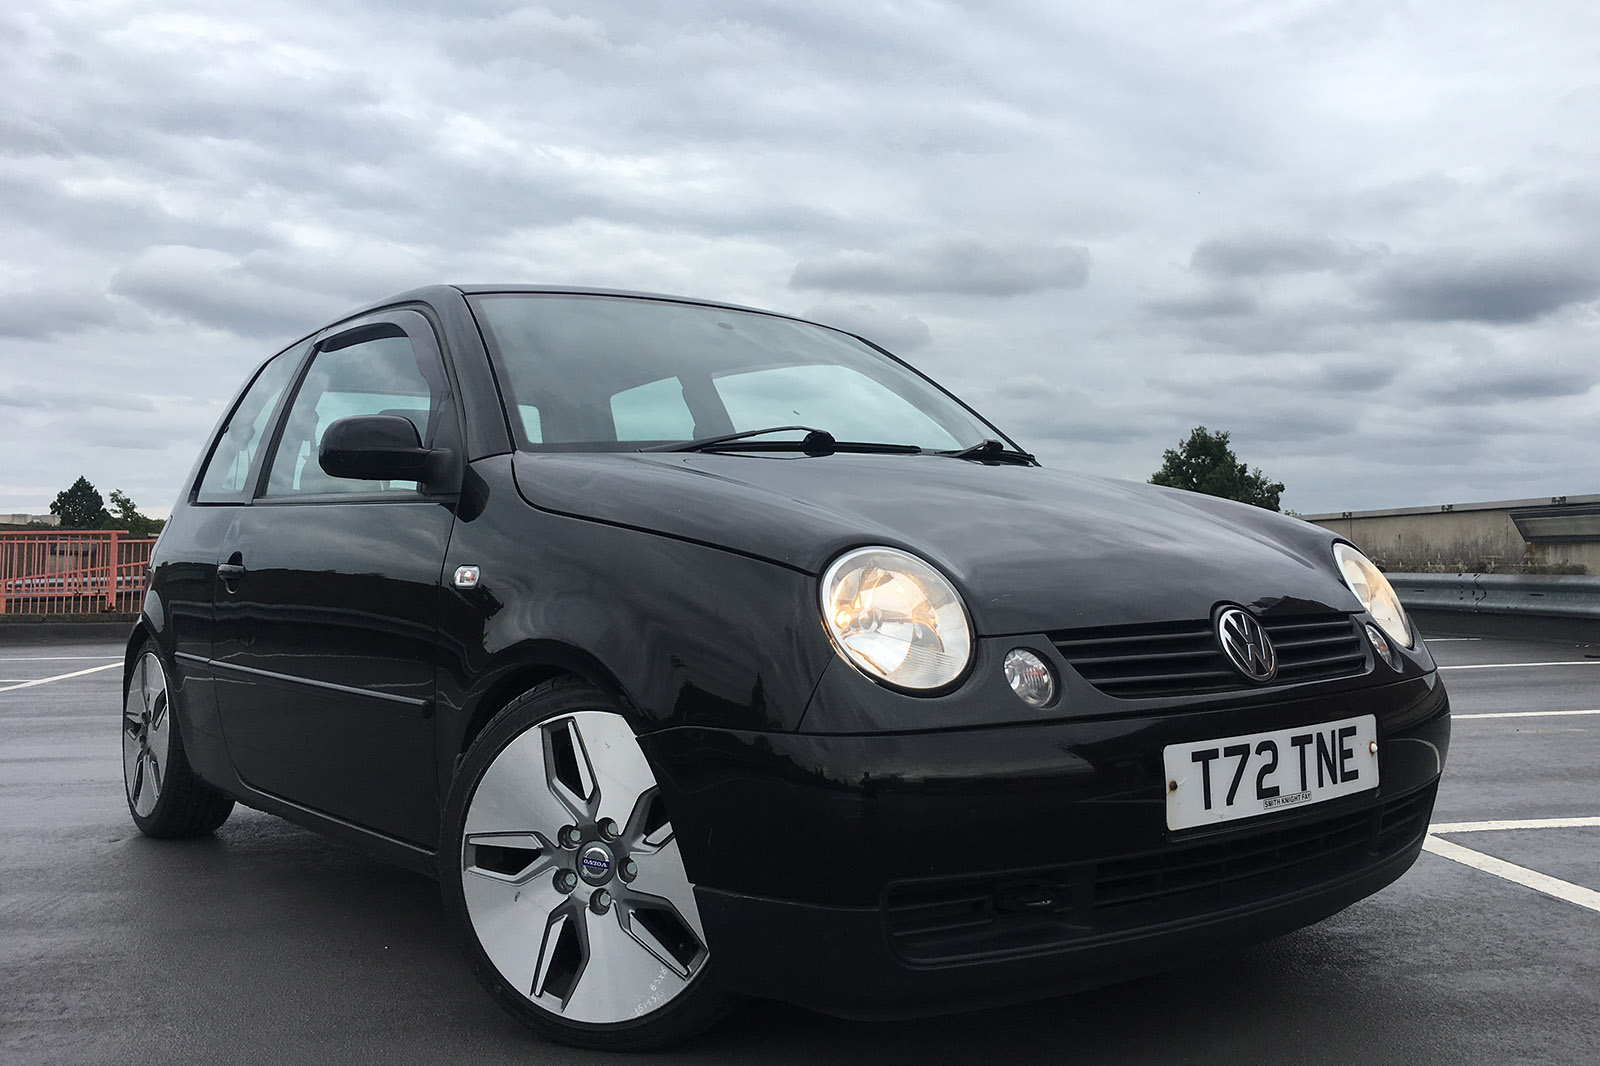 The road to Worthersee in a Volkswagen Lupo - the wheels go on